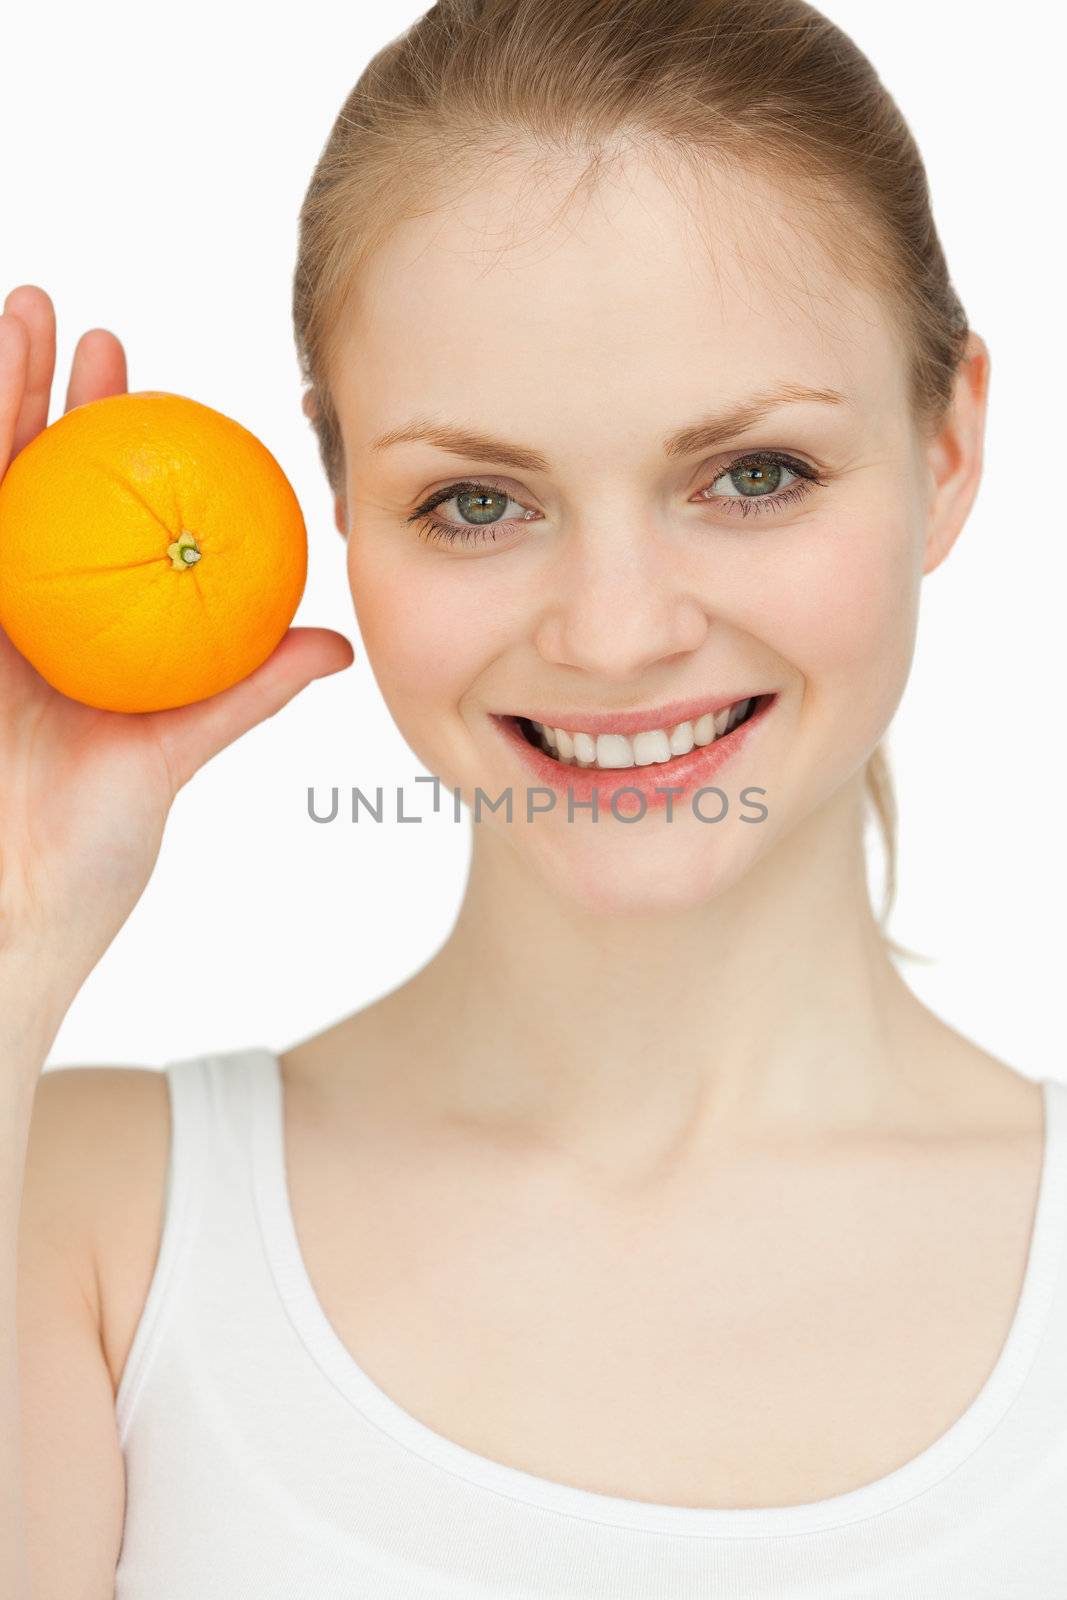 Smiling blonde-haired presenting an orange against white background